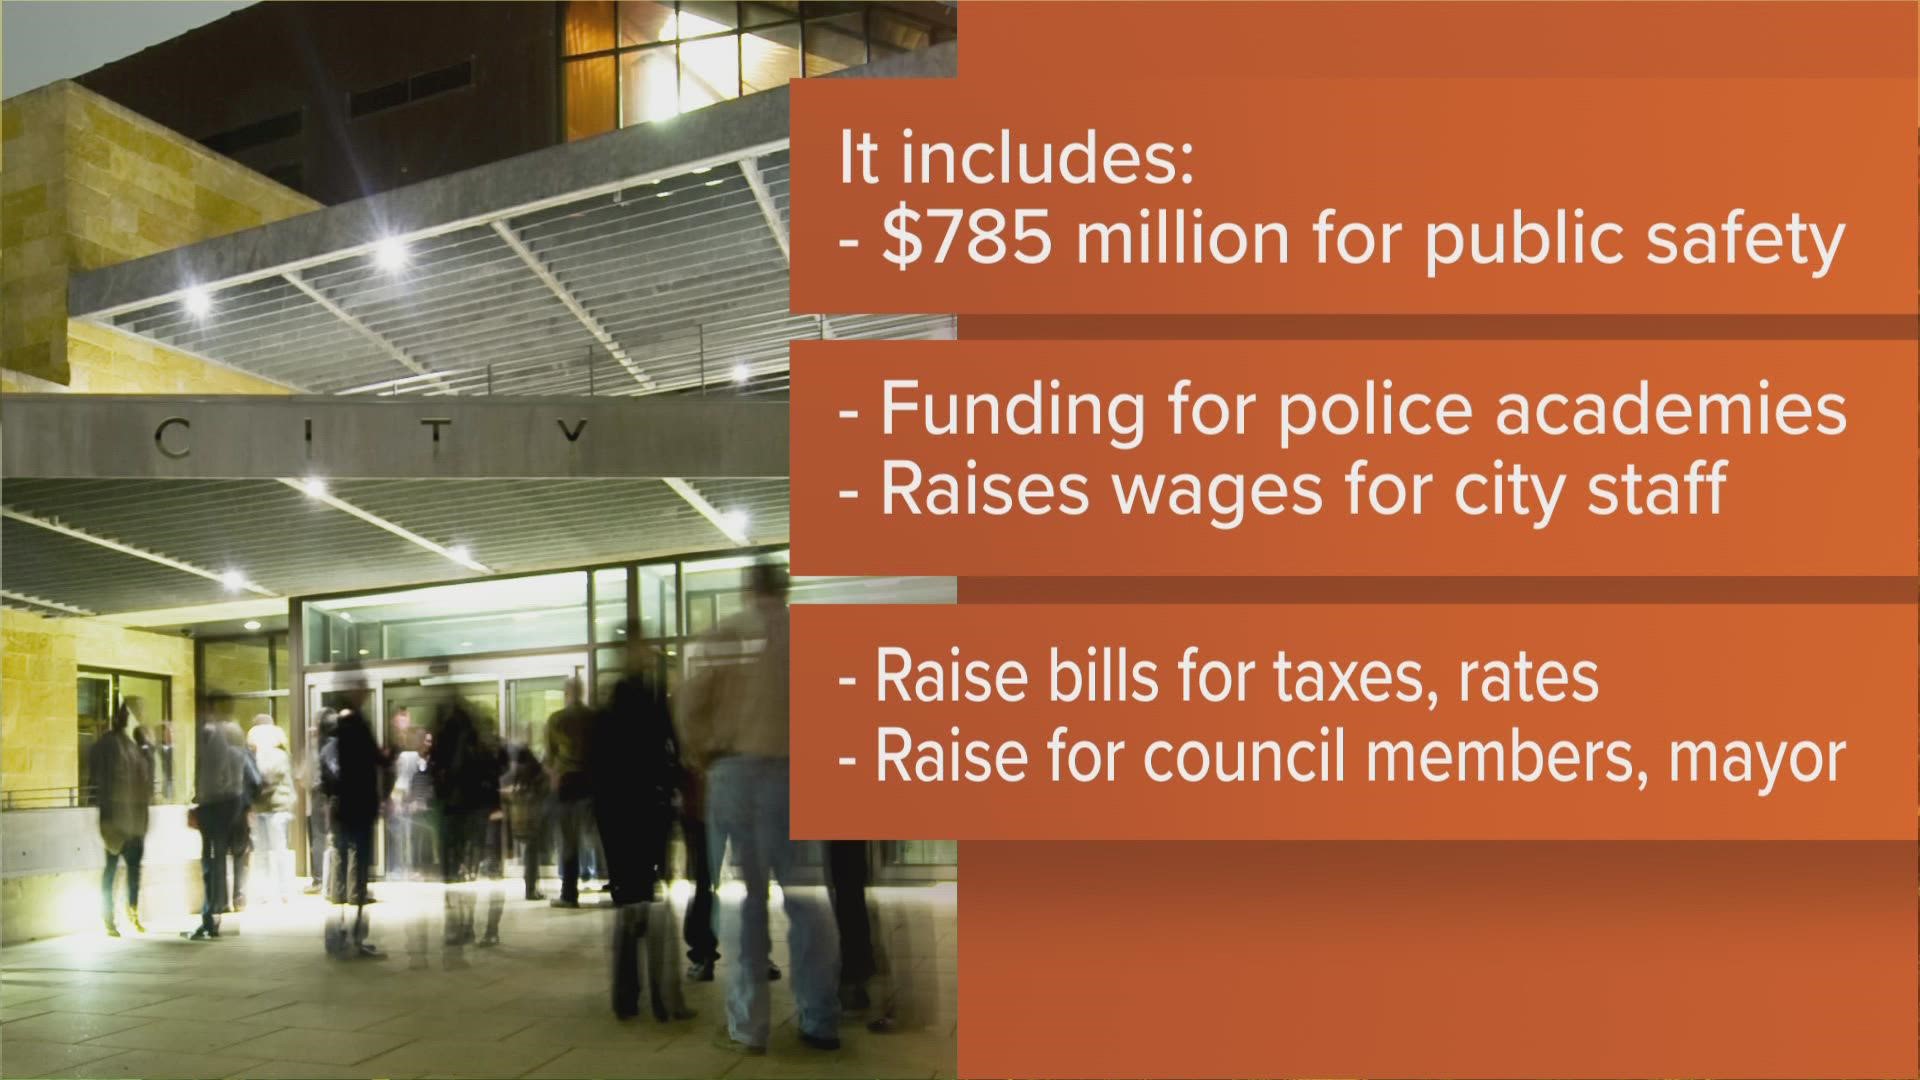 The Austin City Council has approved a $5 billion budget for fiscal year 2022-23. The budget includes added investments in rental assistance, police cadets and more.